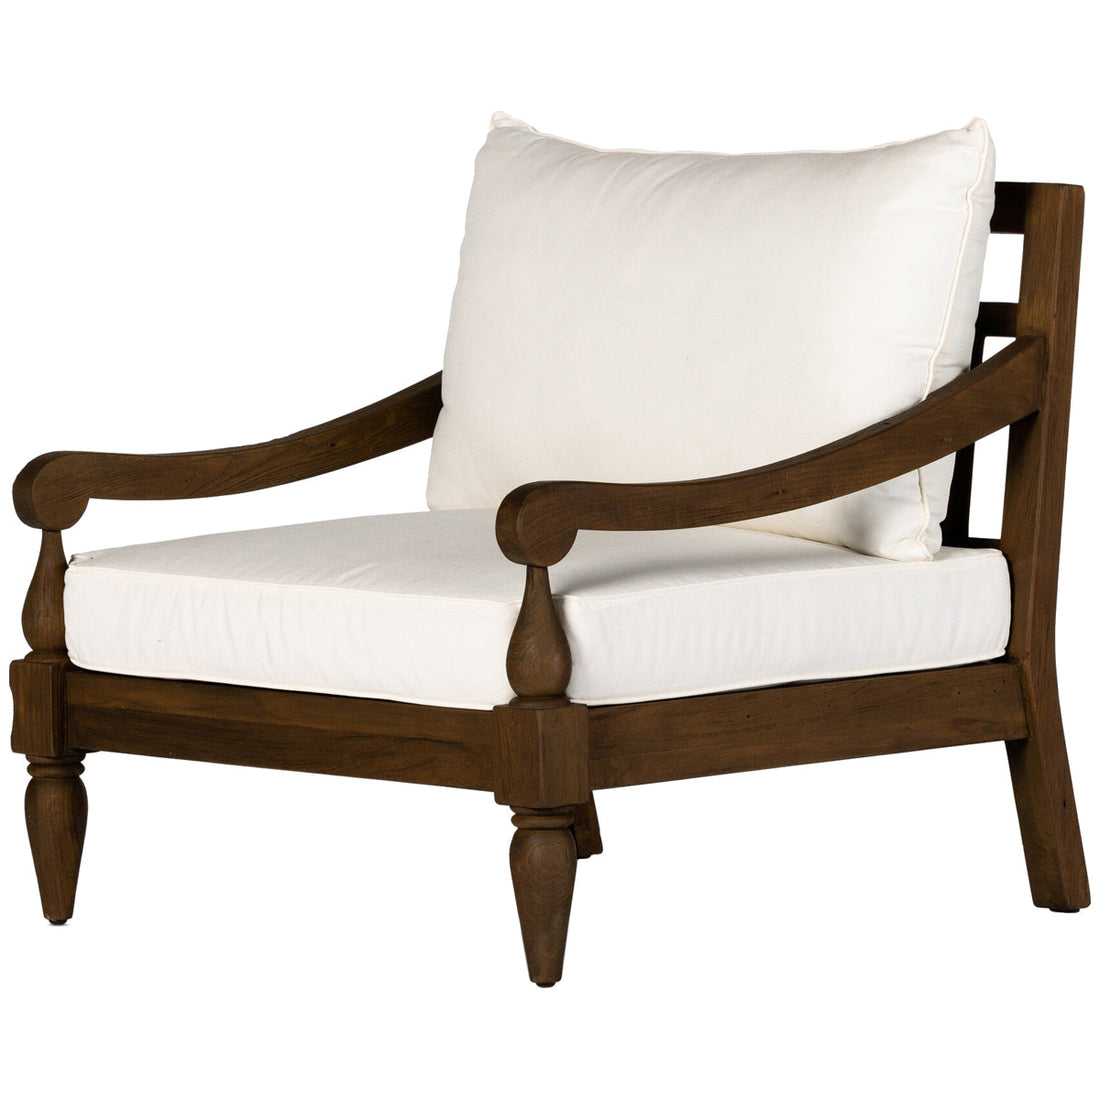 Four Hands Alameda Outdoor Chair - Venao Ivory